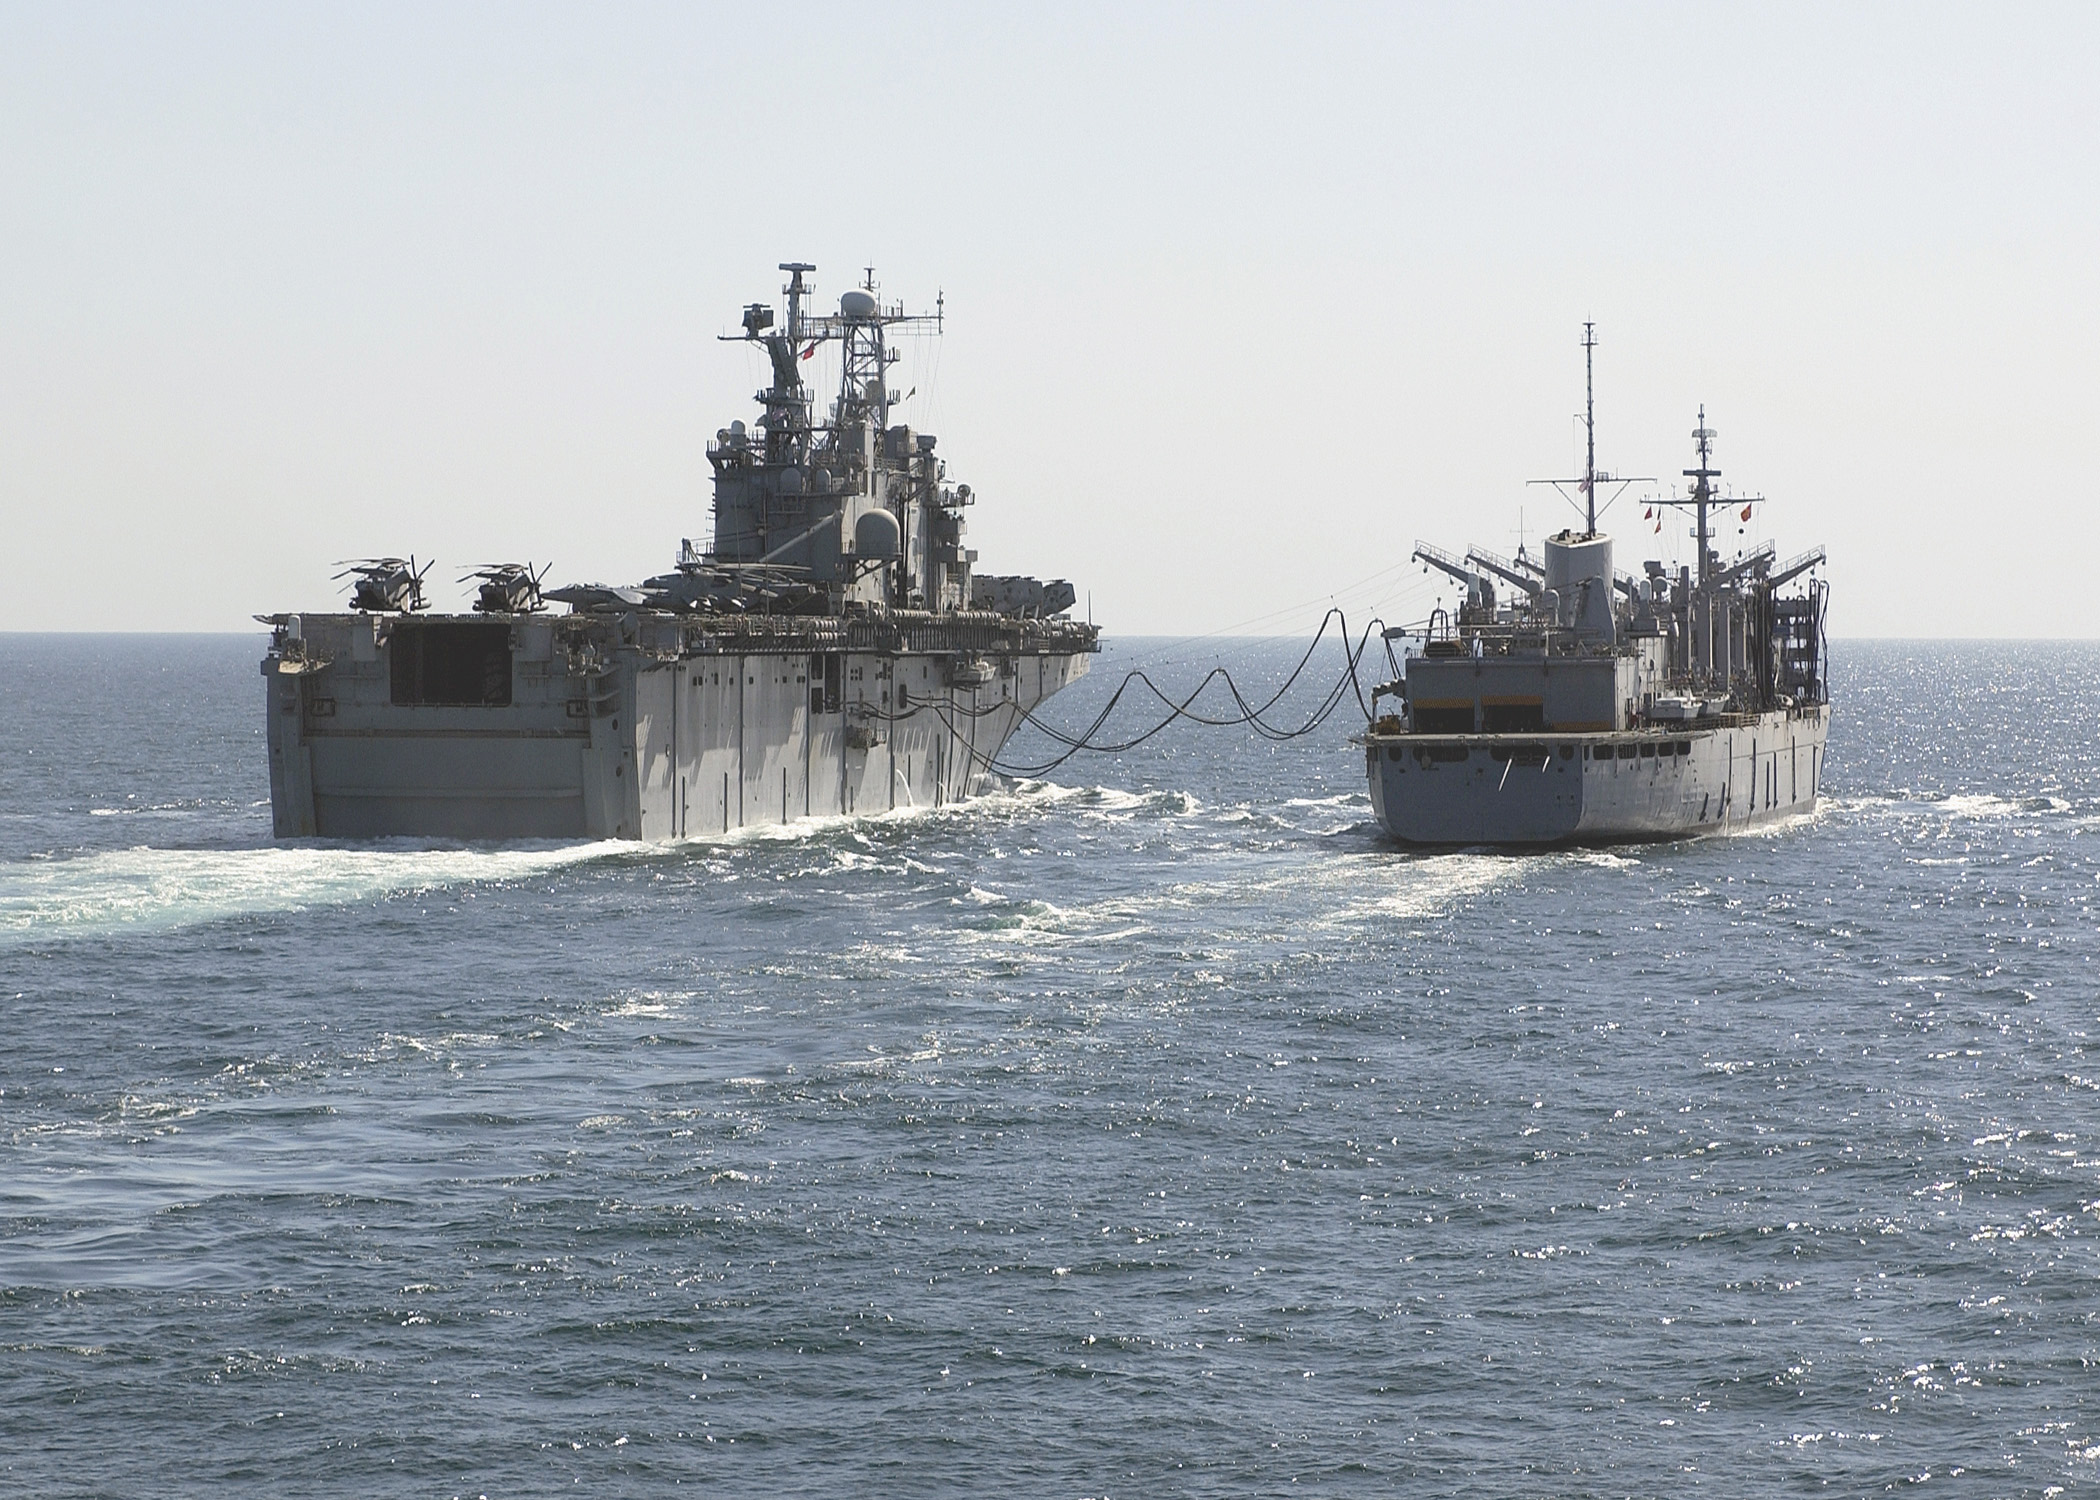 US Navy 031103-N-6939M-011 USS Detroit (AOE 4) performs an underway replenishment